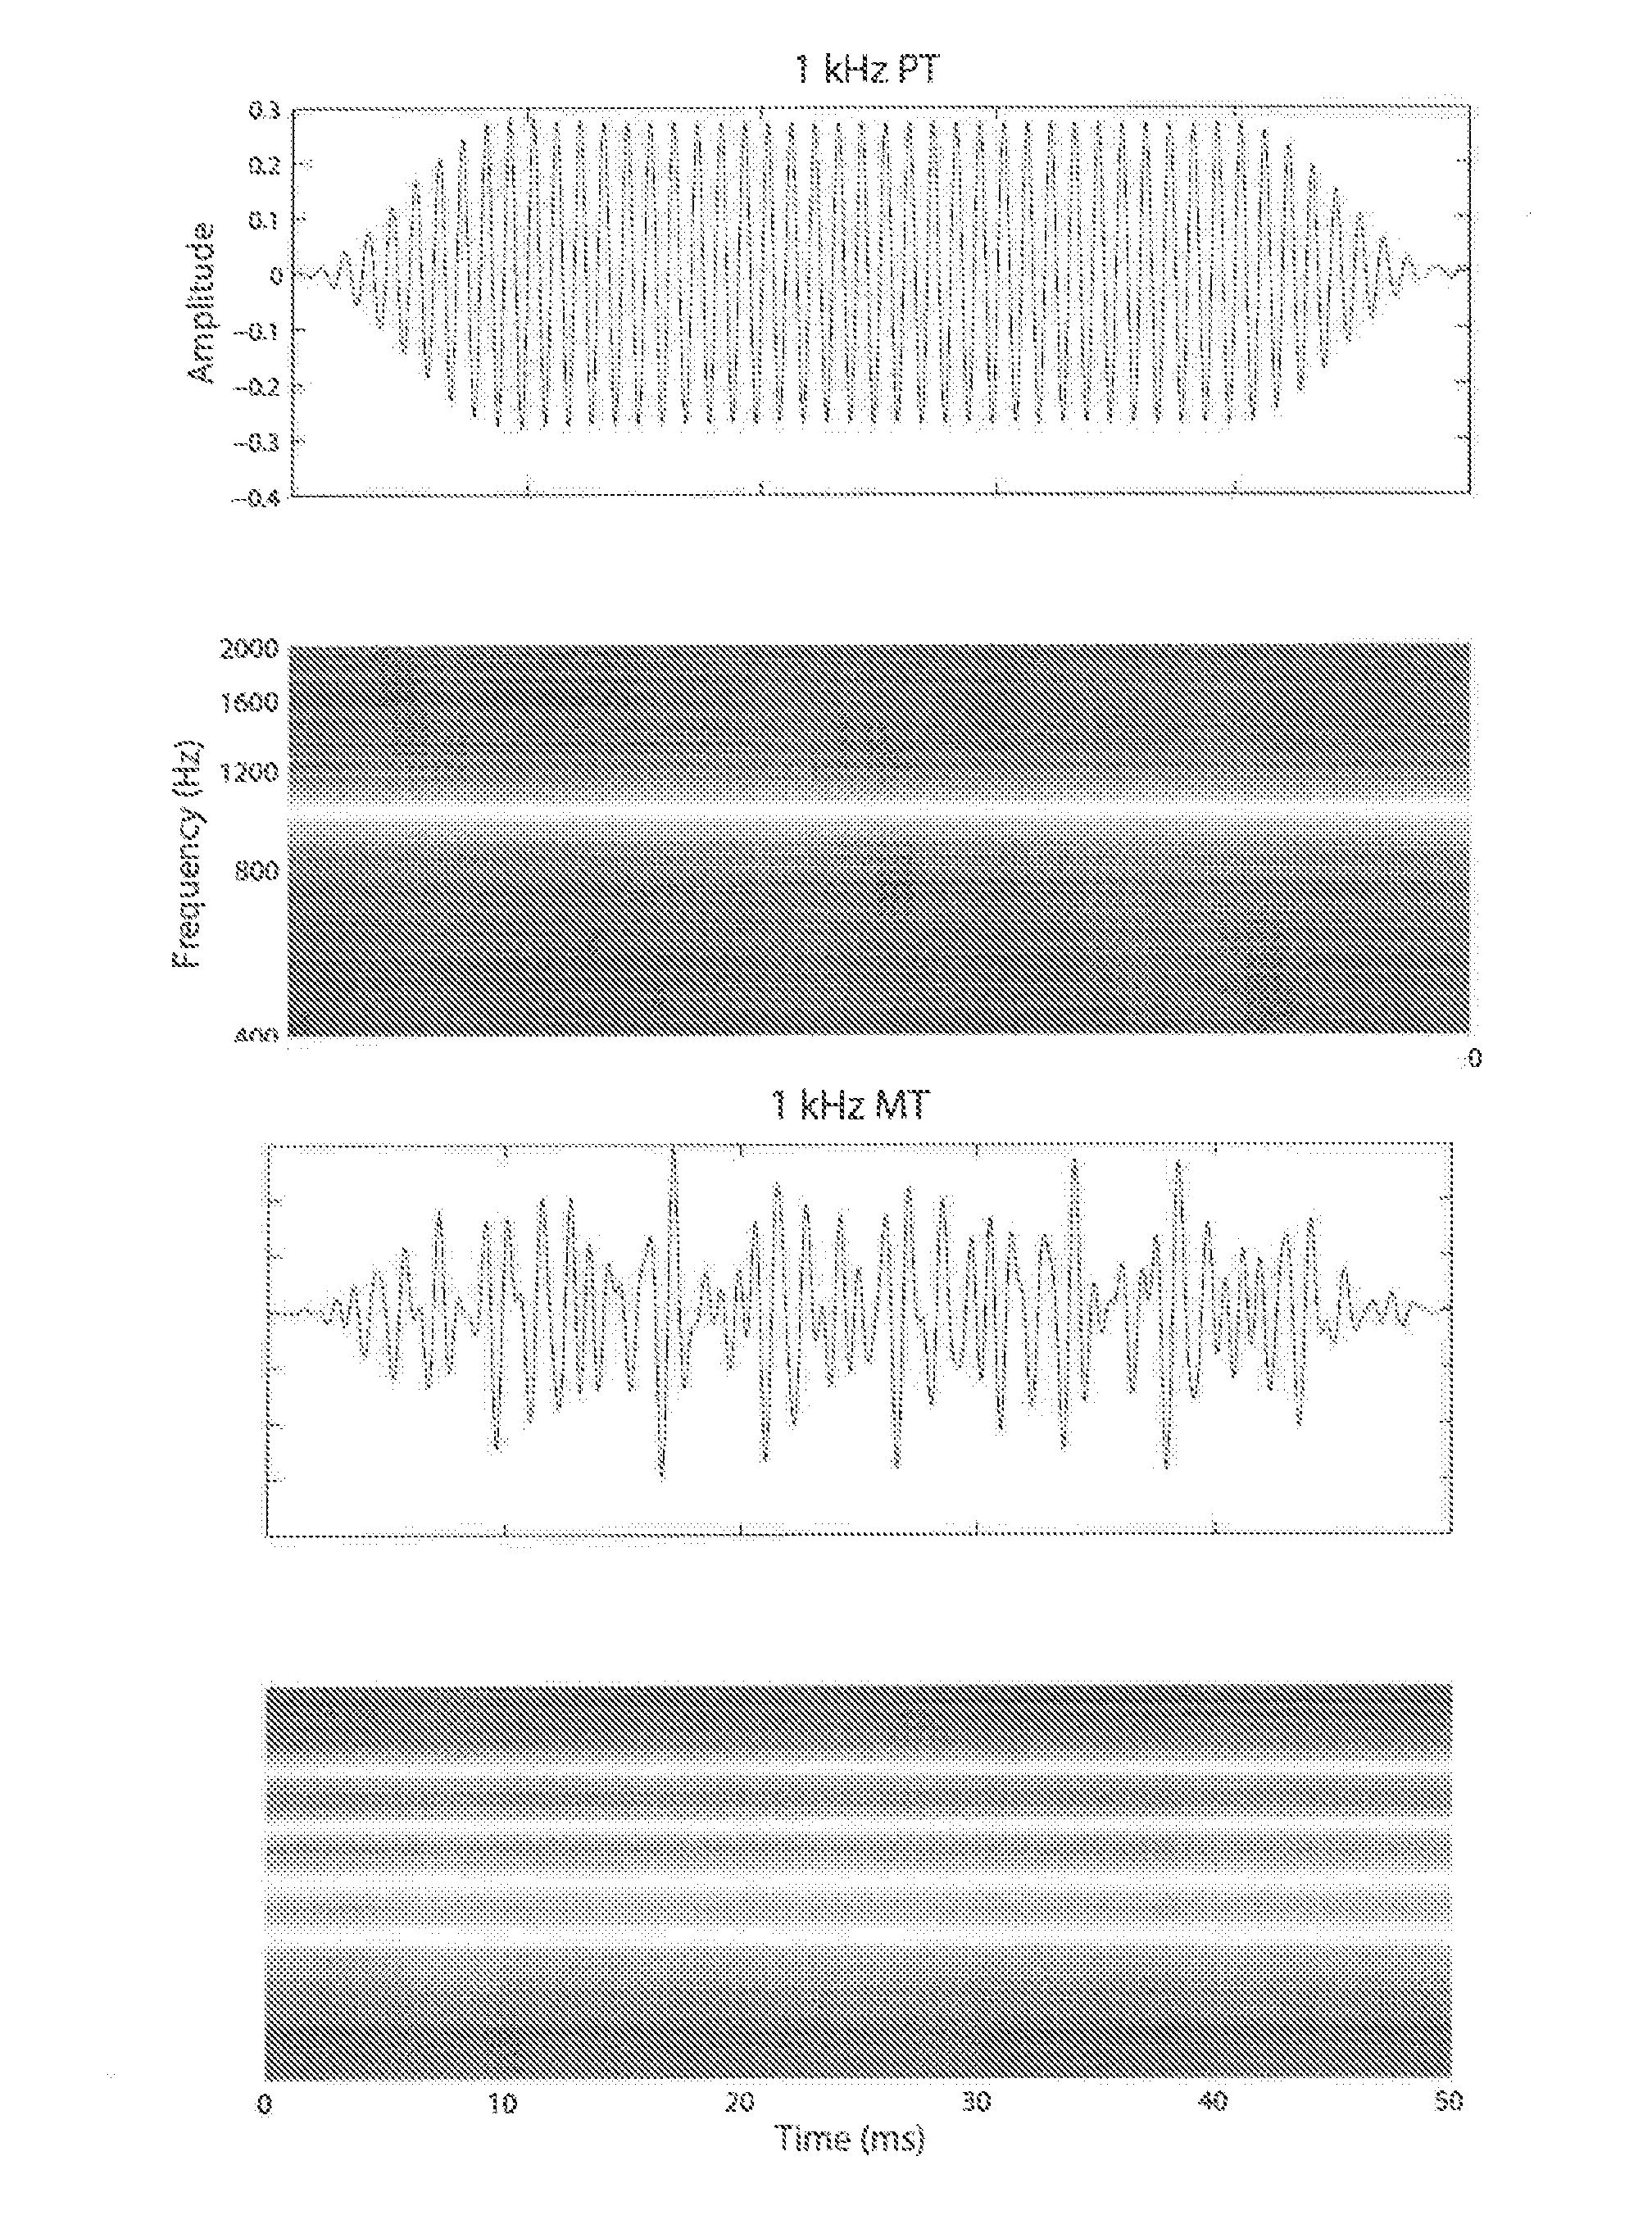 Systems and methods for objectively determining hearing thresholds